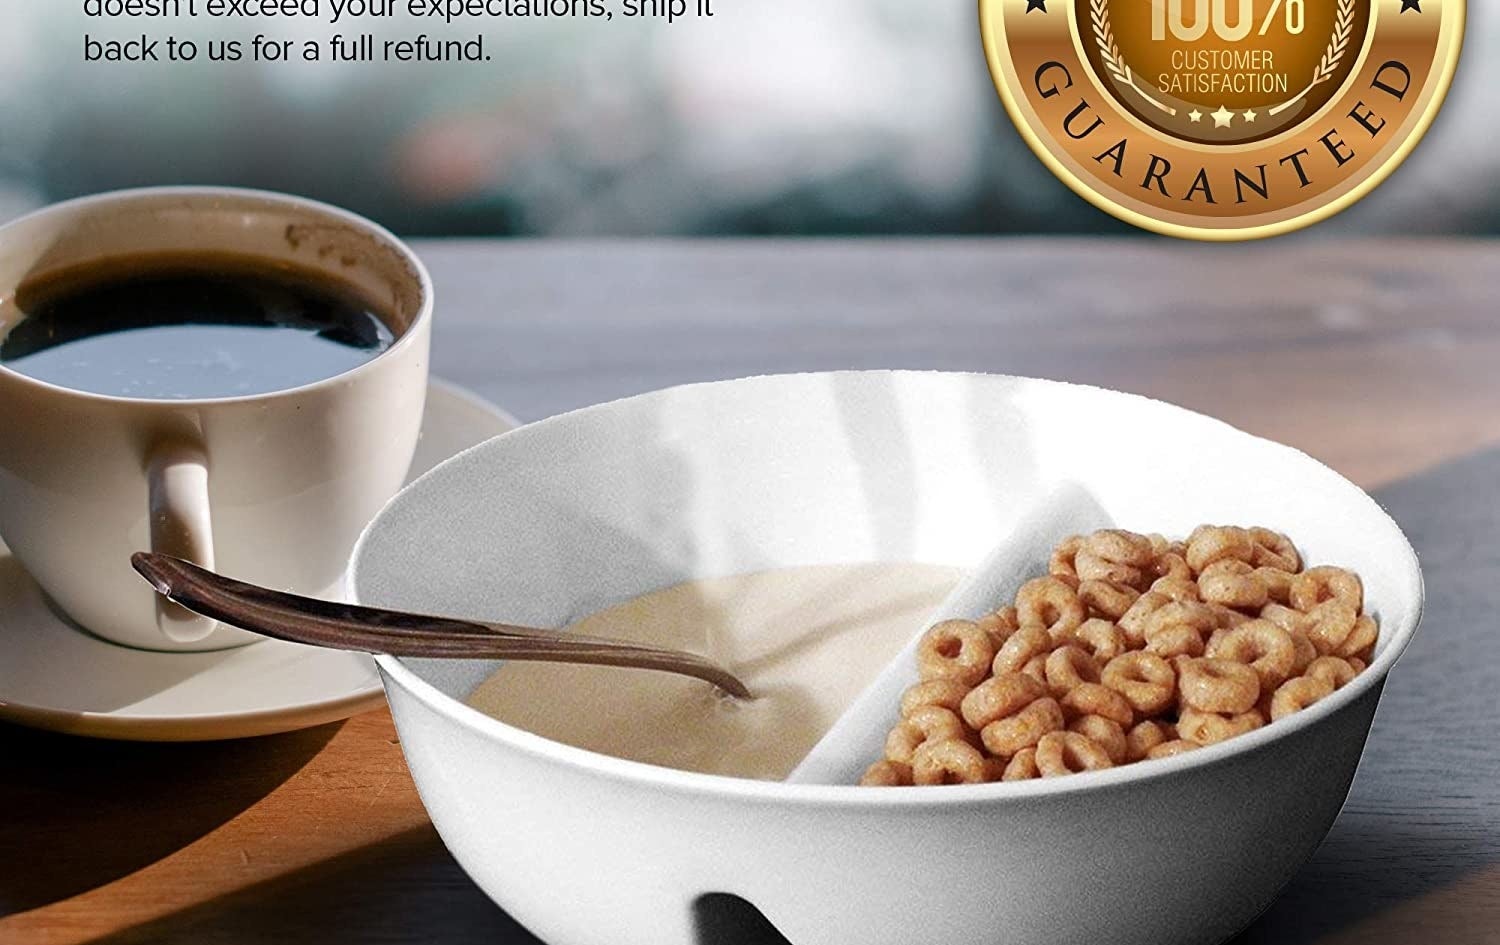 A bowl with milk in one compartment and cereal in another